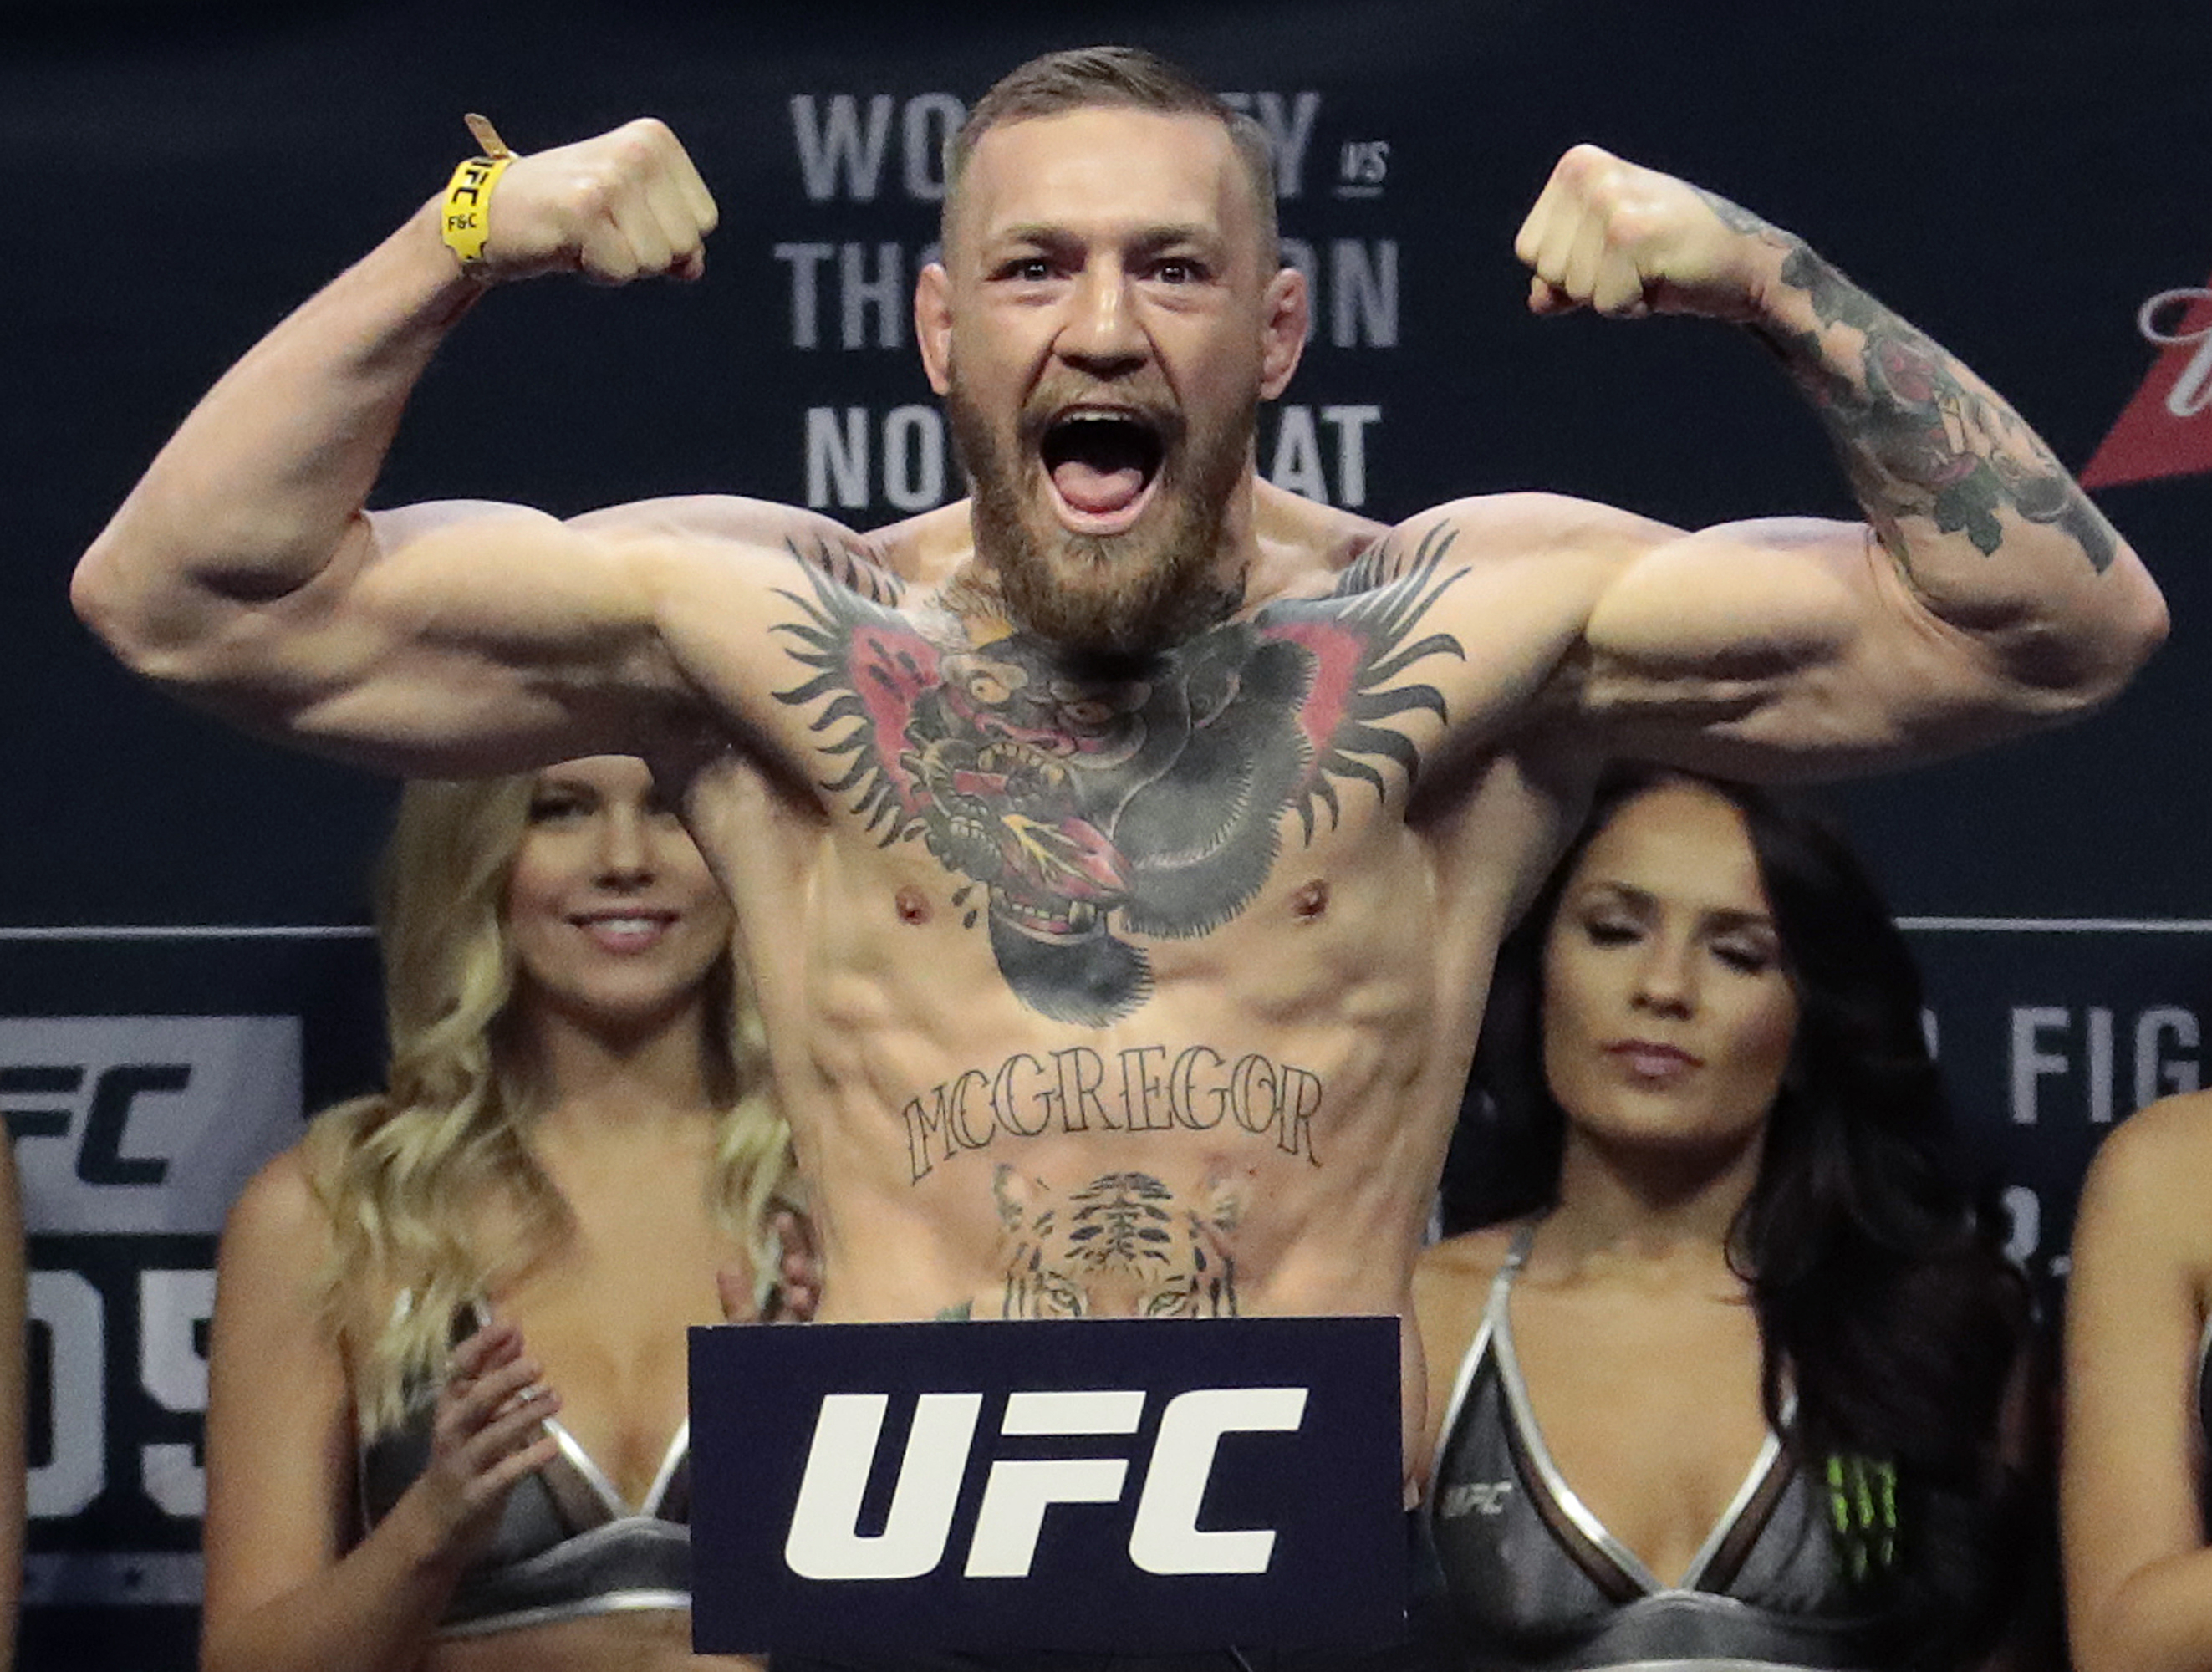 FILE - In this Friday, Nov. 11, 2016, file photo, Conor McGregor stands on a scale during the weigh-in event for his fight against Eddie Alvarez in UFC 205 mixed martial arts at Madison Square Garden in New York. Floyd Mayweather Jr. wants attention more than he wants a fight. And, really, let's be truthful here. It wouldn't be much of a fight if Mayweather and Conor McGregor met in a boxing ring. (AP Photo/Julio Cortez, File)